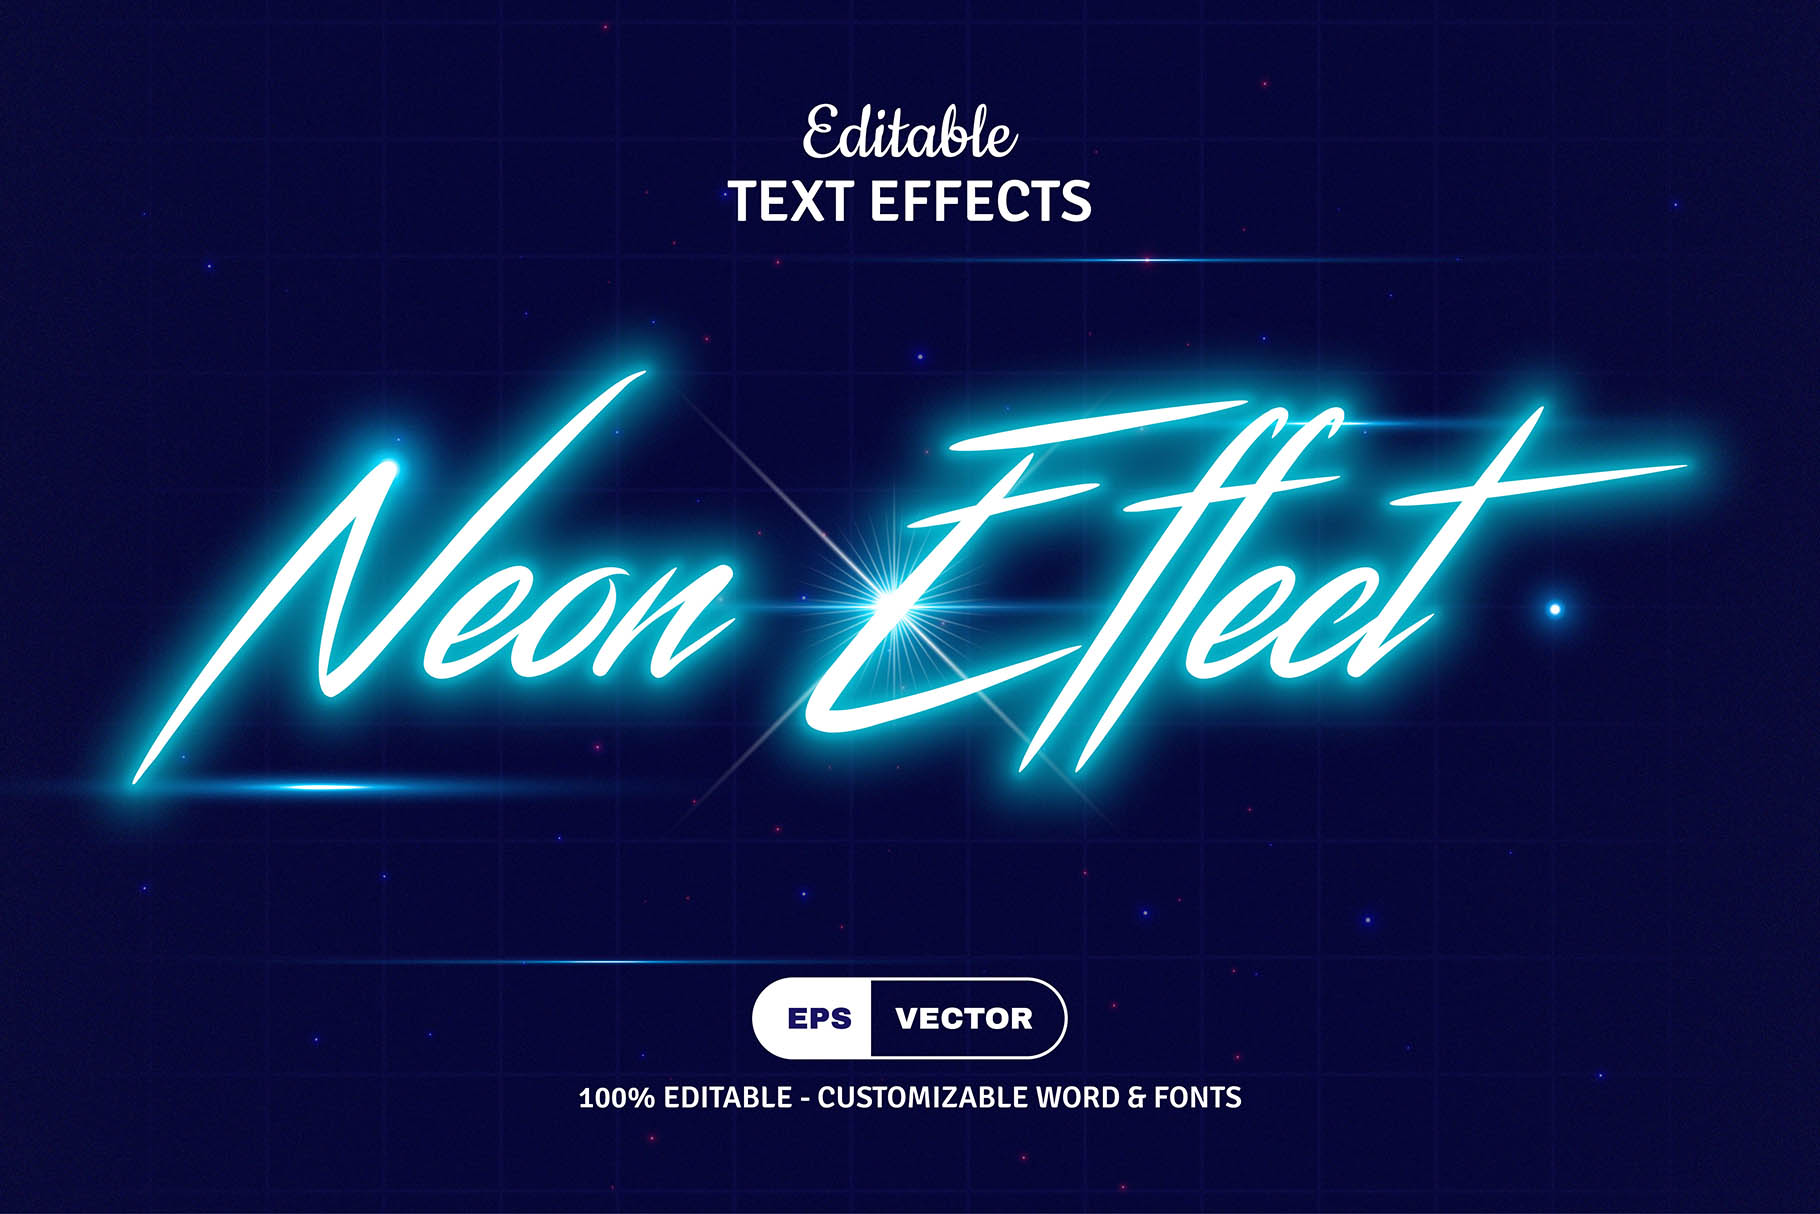 80s text effects 16 774